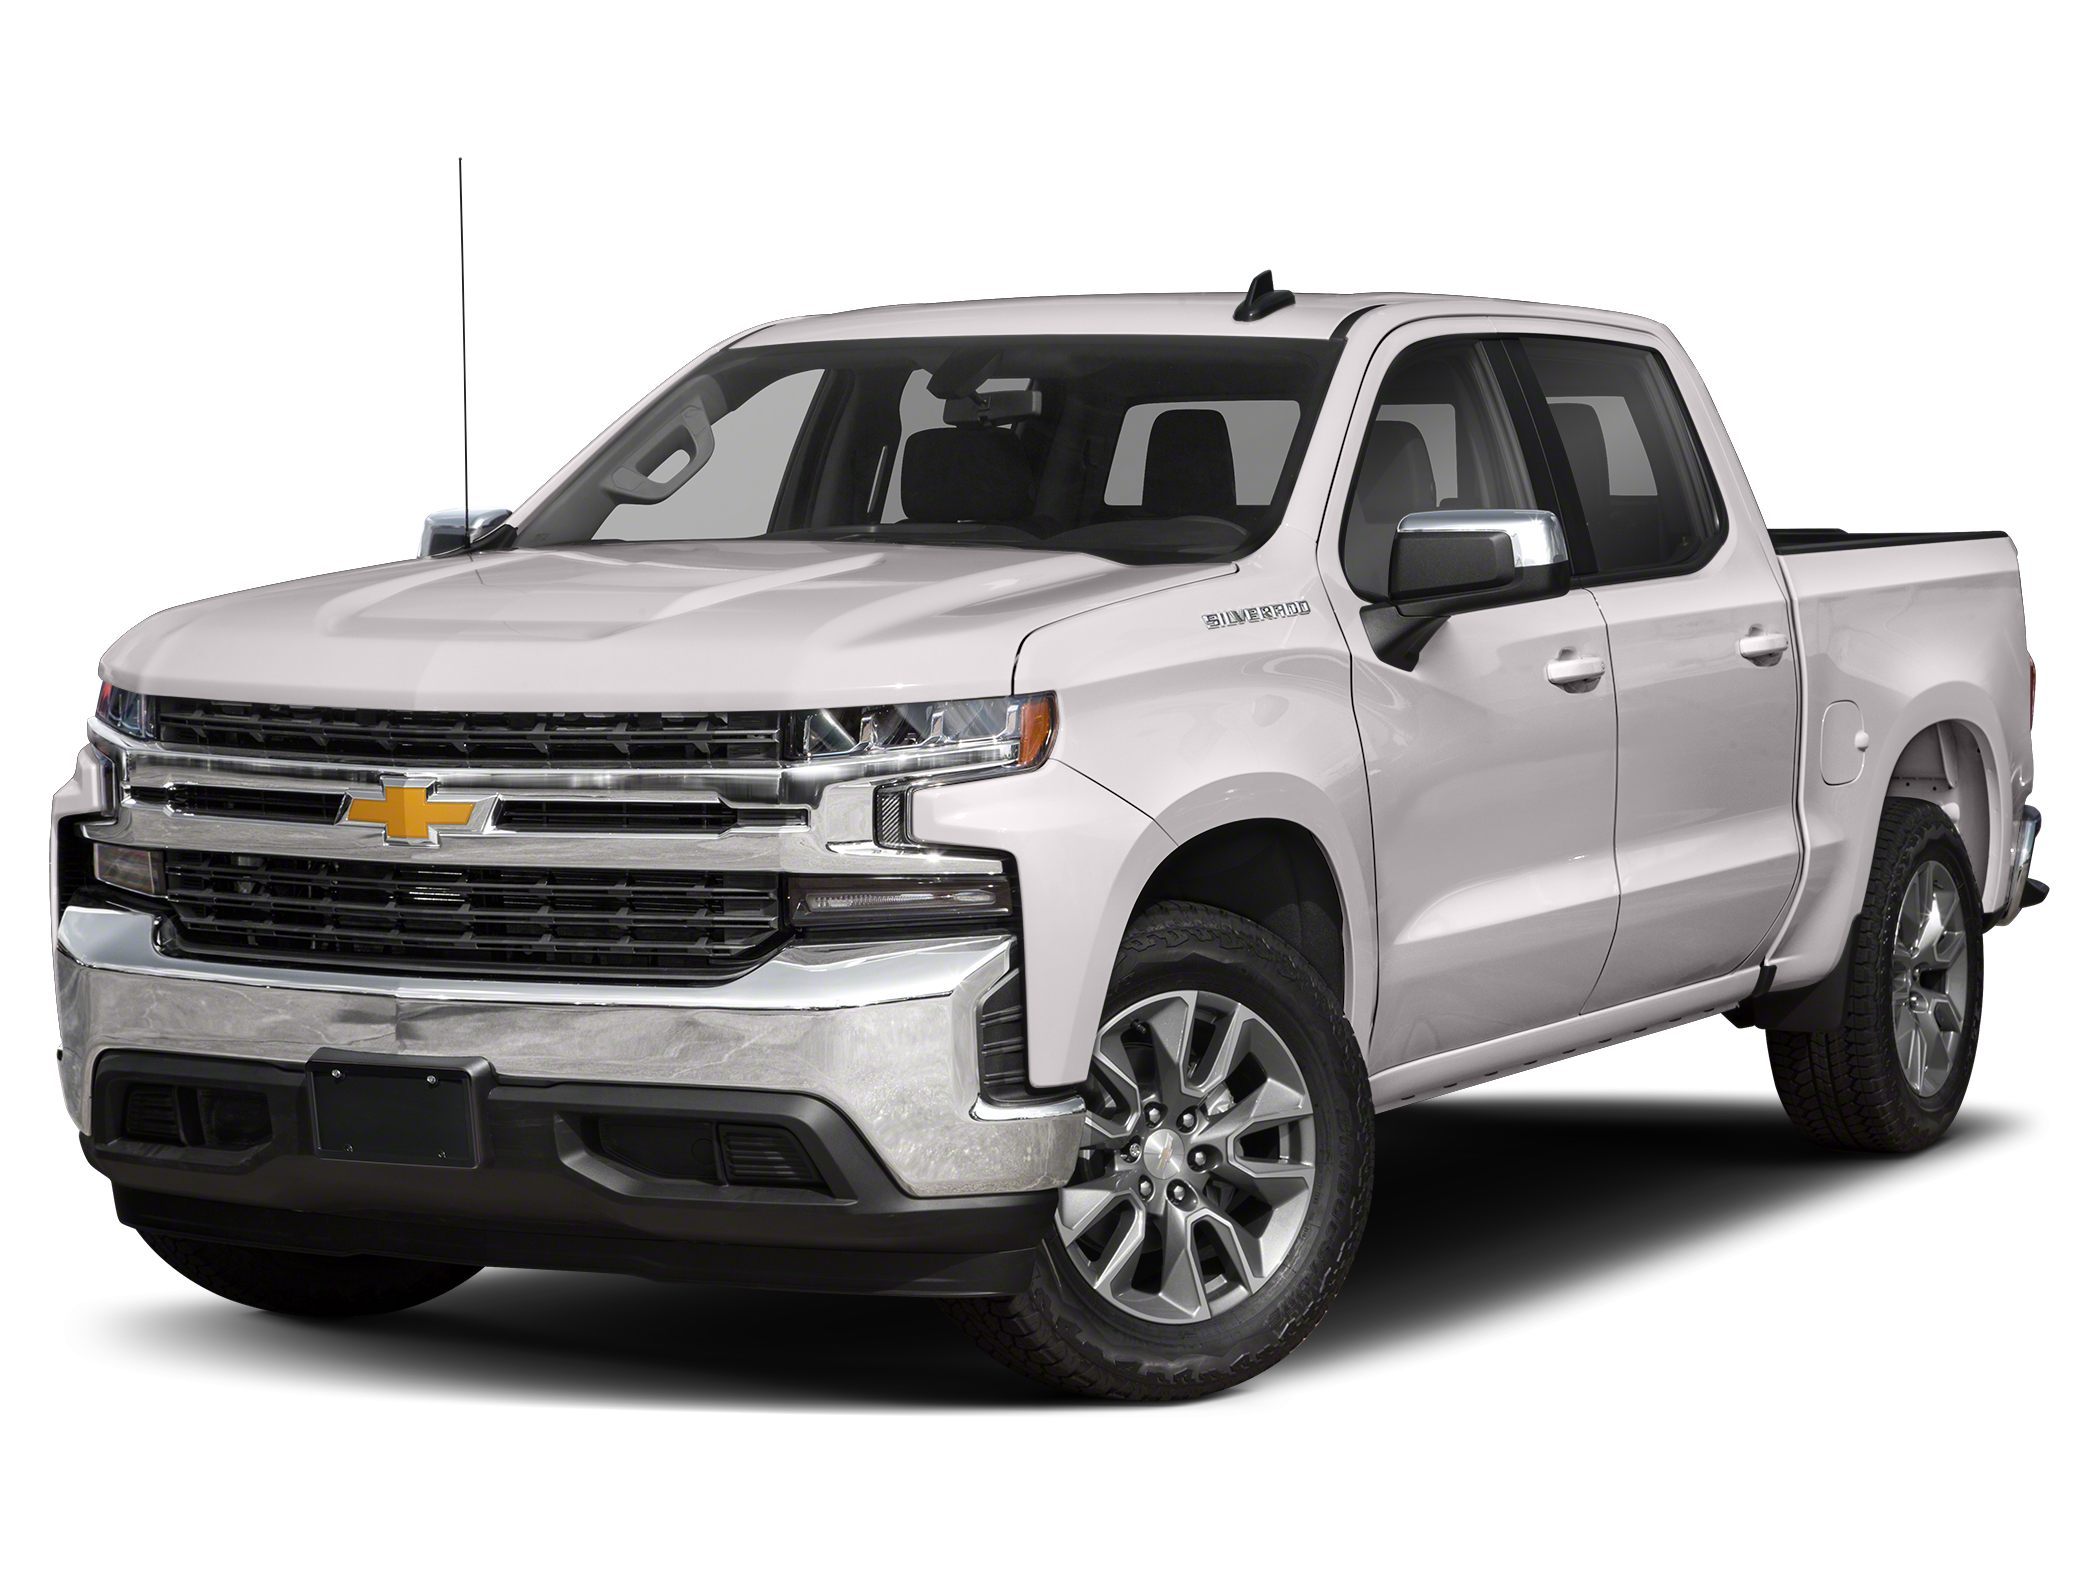 Used 2020 Chevrolet Silverado 1500 LT with VIN 3GCUYDED2LG243757 for sale in Cold Spring, Minnesota